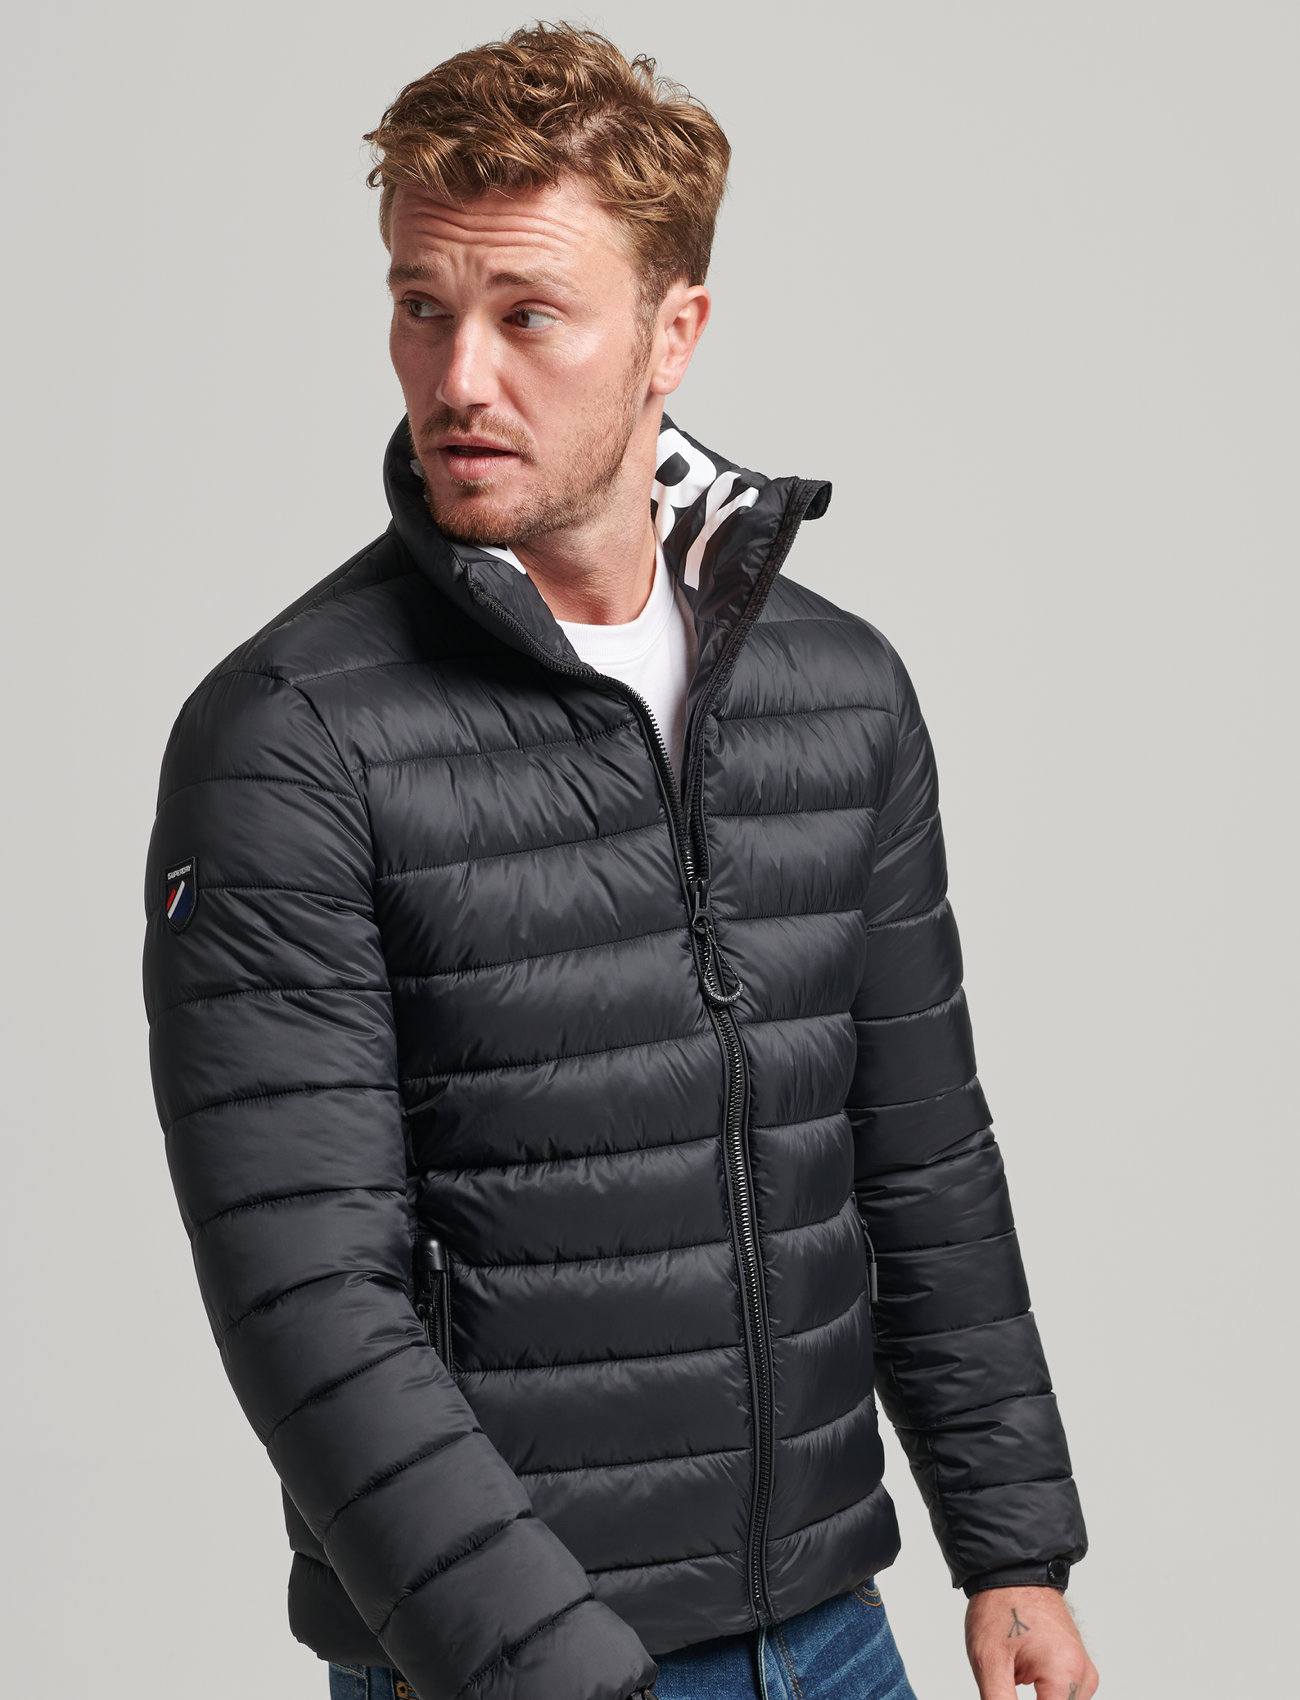 easy online returns Superdry 99.99 delivery Non from €. Padded Fuji jackets Mtn Hood at and Jkt Buy Boozt.com. - Superdry Code Fast